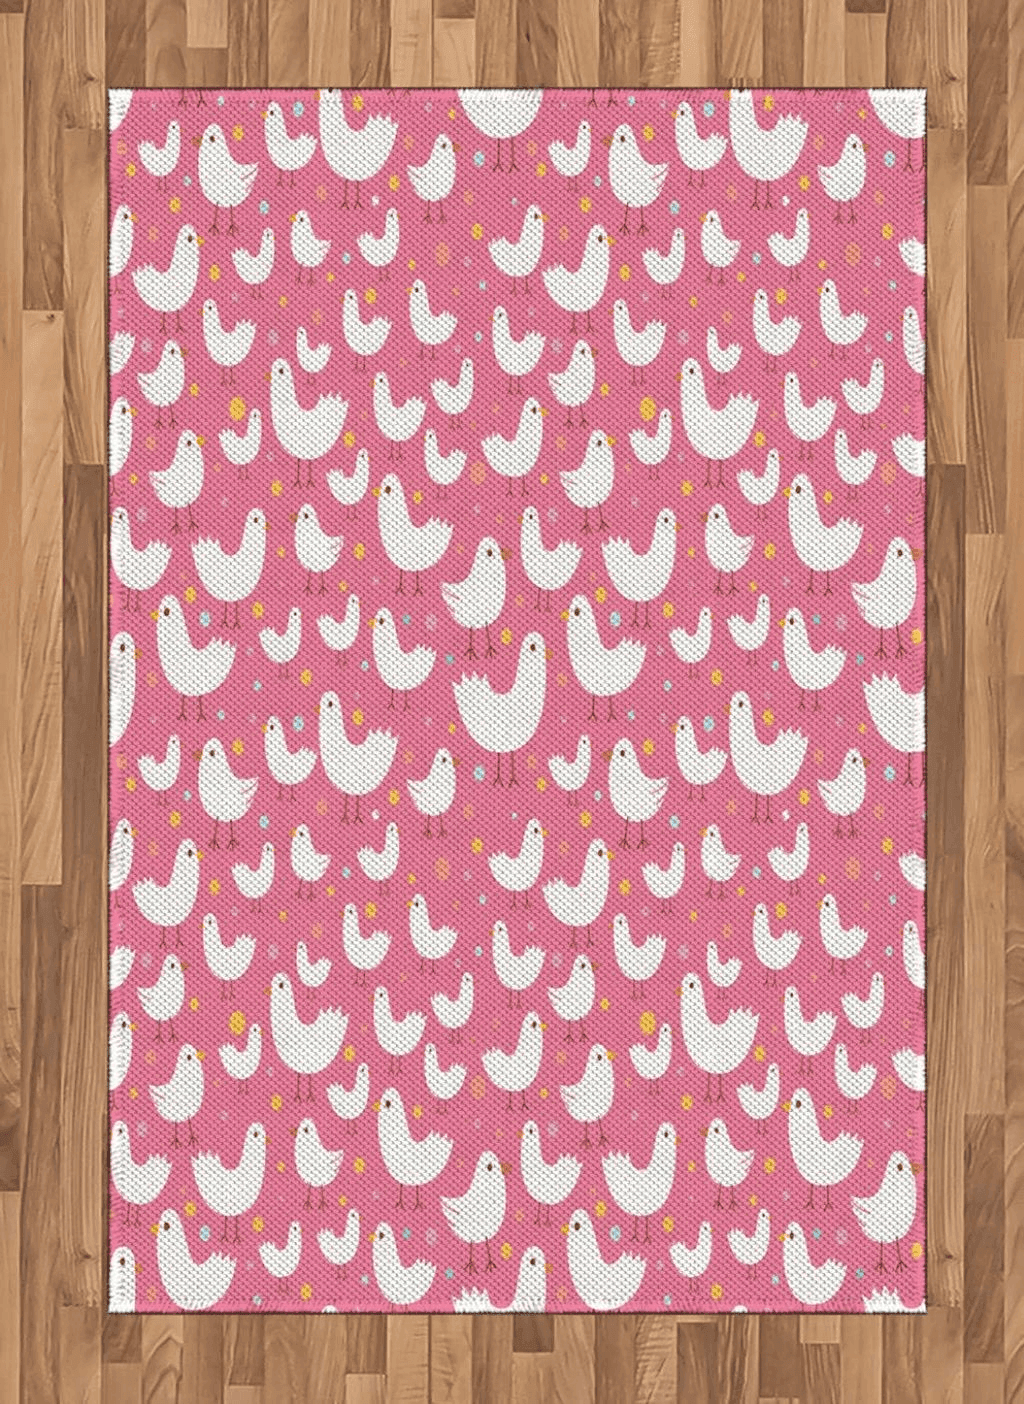 Fluffy Pink Ambesonne Birds Area Rug, Poultry Concept Abstract White Silhouettes of Fluffy Chickens and Tiny Sparrow Birds, Flat Woven Accent Rug for Living Room Bedroom Dining Room, 4' X 5' 7", Multicolor